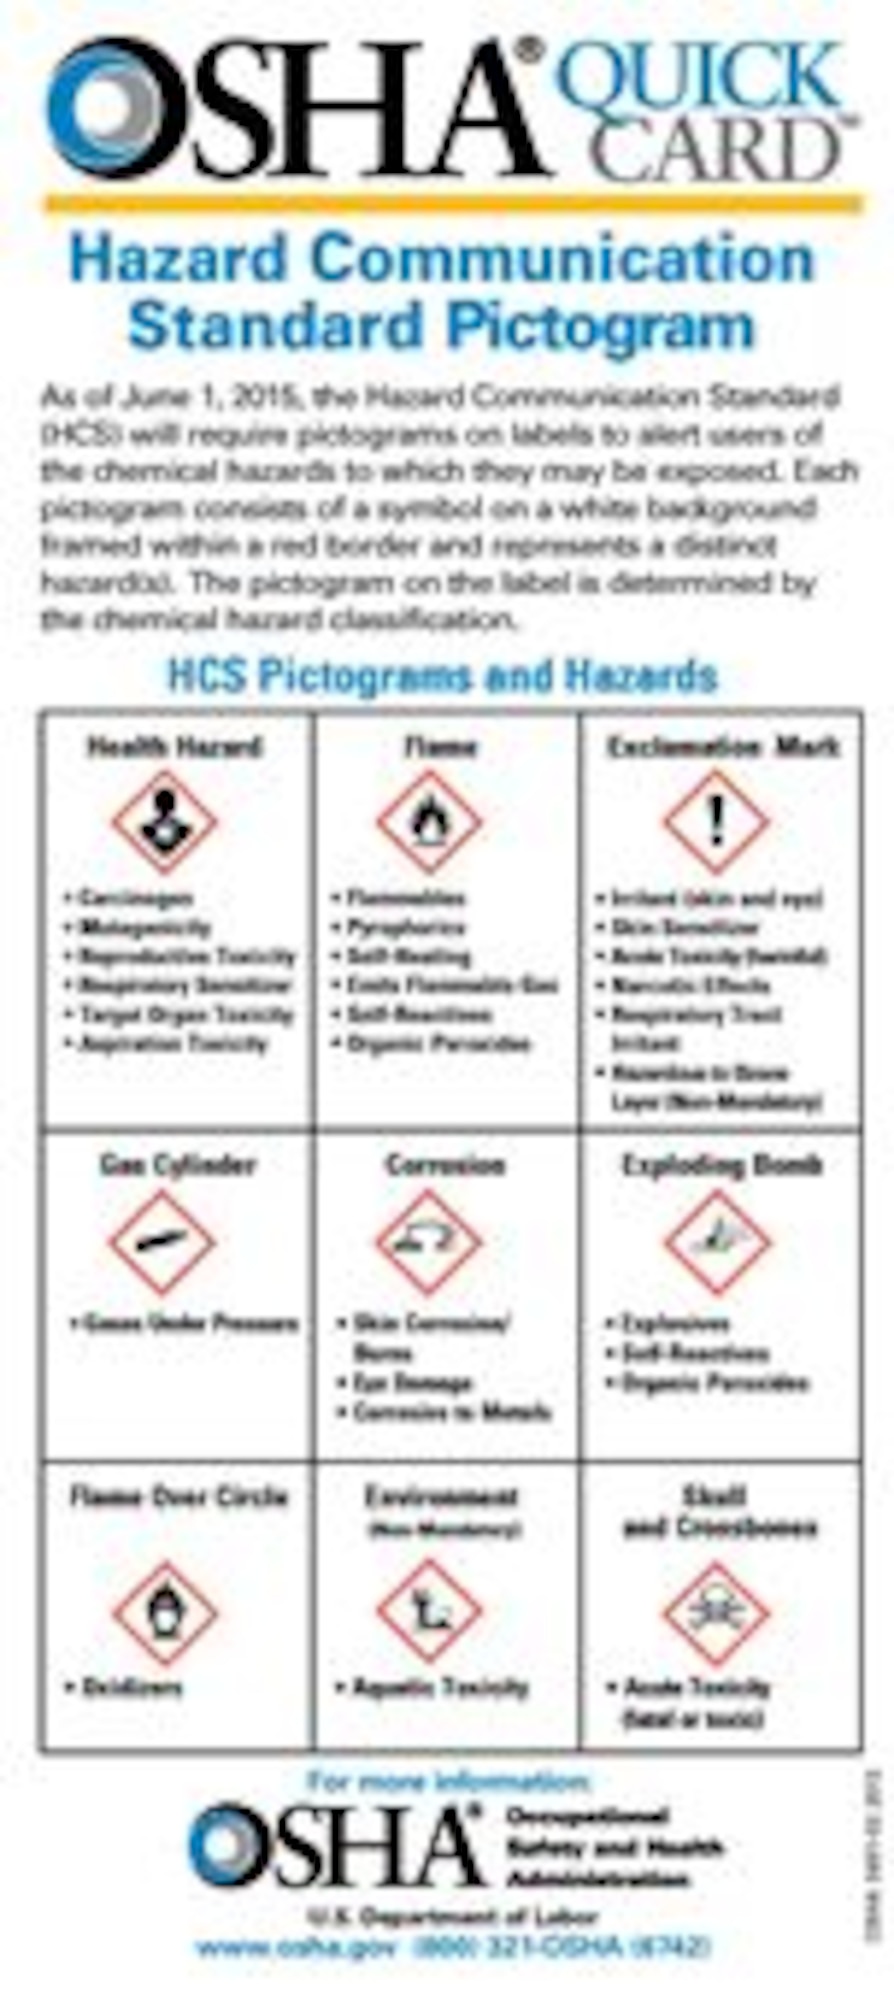 OSHA changes Material Safety Data Sheets going away > Edwards Air